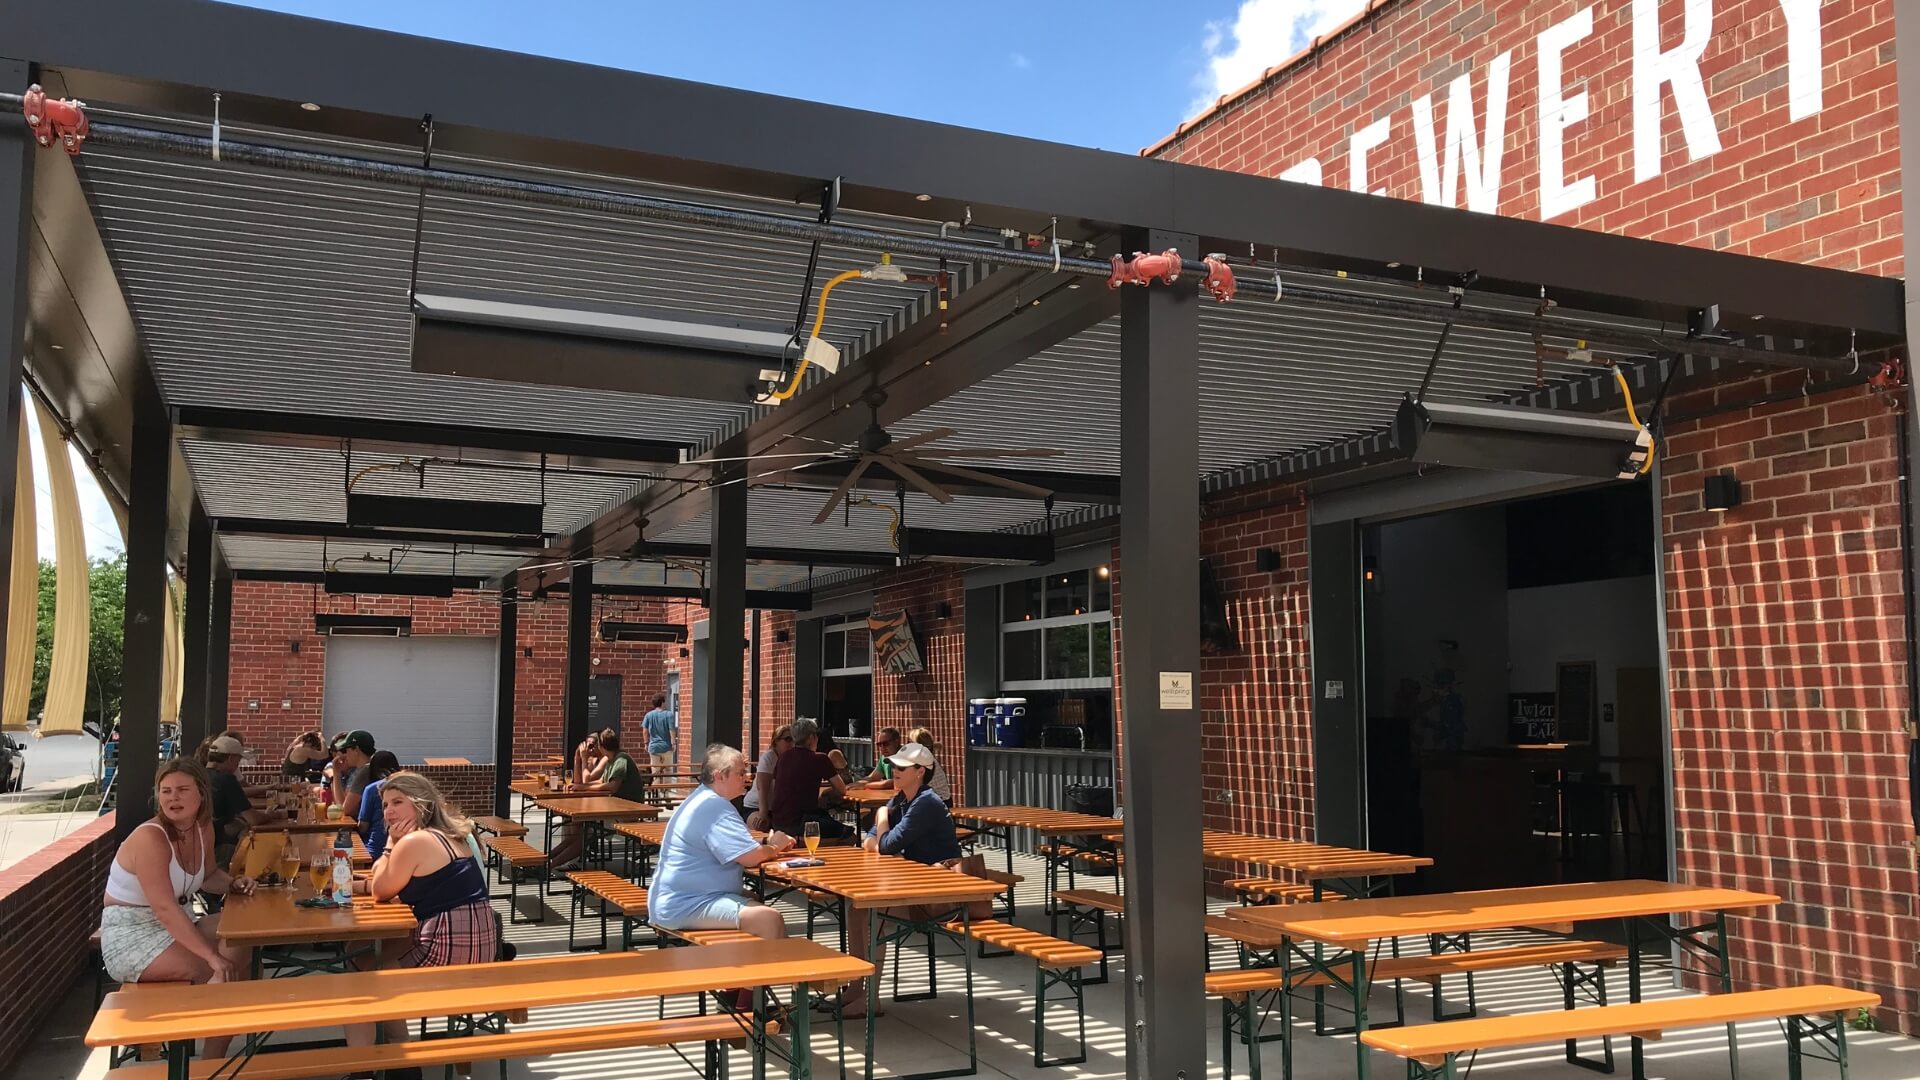 In Charlotte, classic beer garden table sets are on the patio at Wooden Robot Brewery.